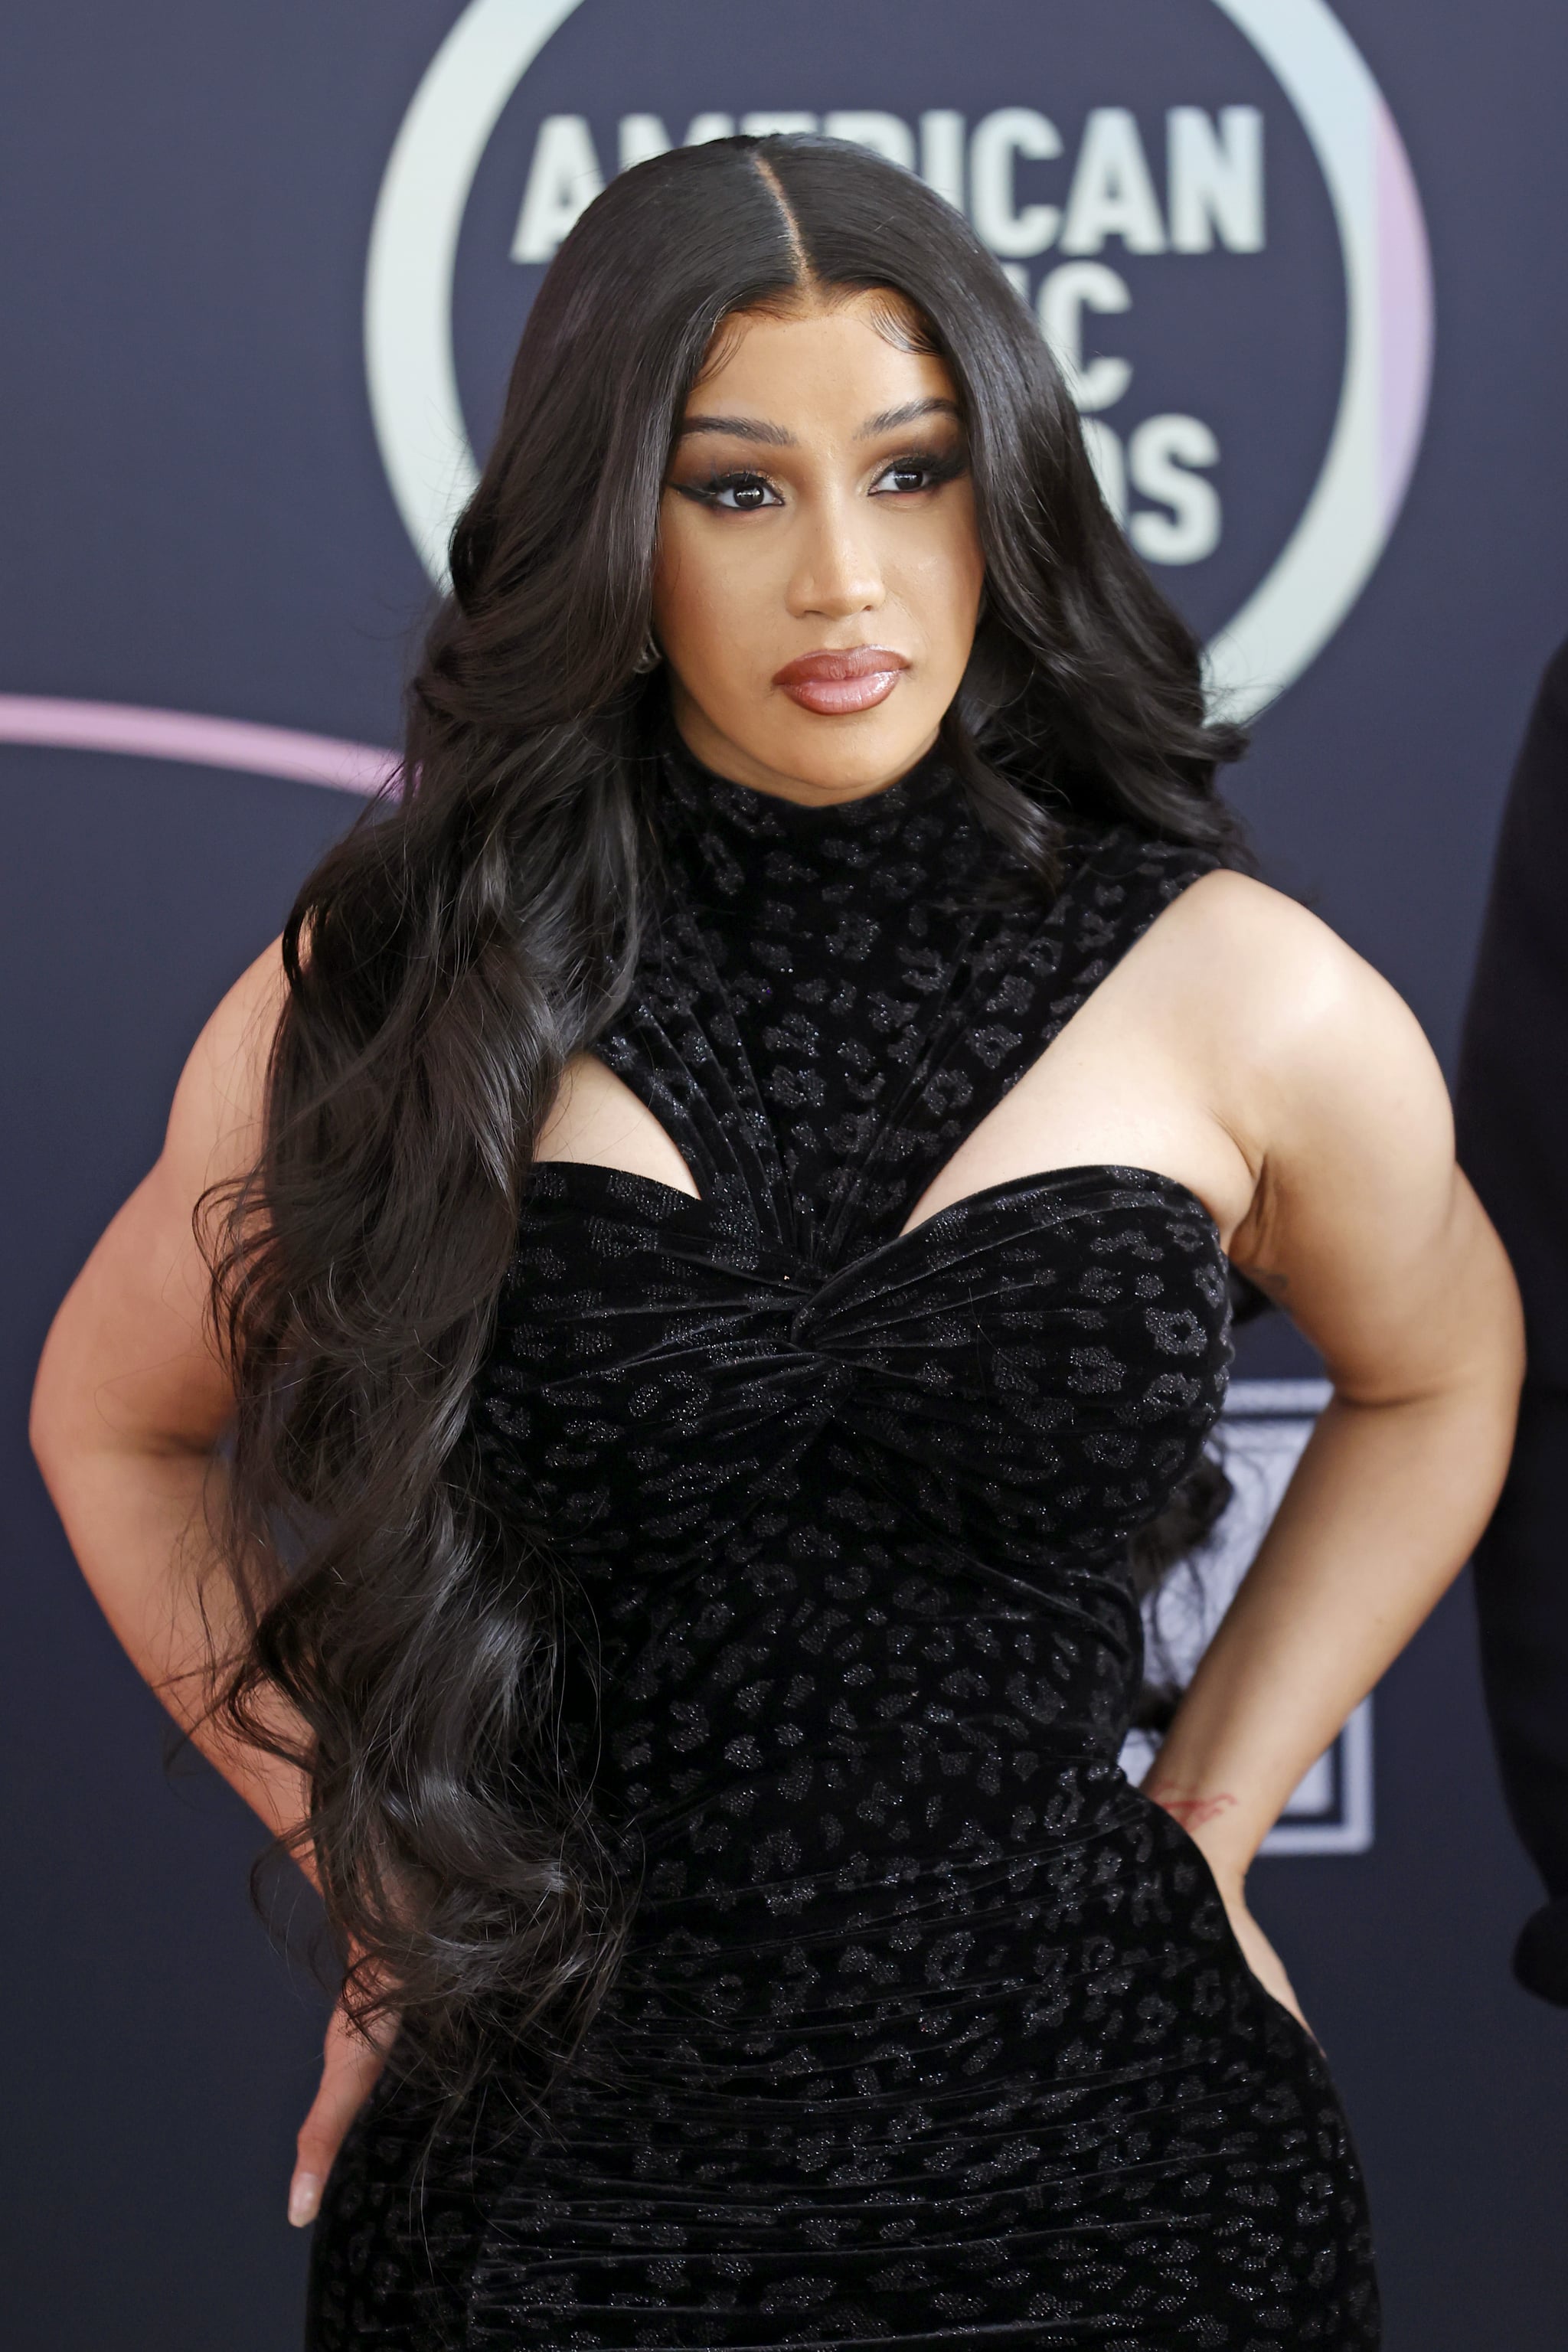 LOS ANGELES, CALIFORNIA - NOVEMBER 19: Host Cardi B attends the 2021 American Music Awards Red Carpet Roll-Out with Host Cardi B at L.A. LIVE on November 19, 2021 in Los Angeles, California. (Photo by Frazer Harrison/Getty Images for MRC)